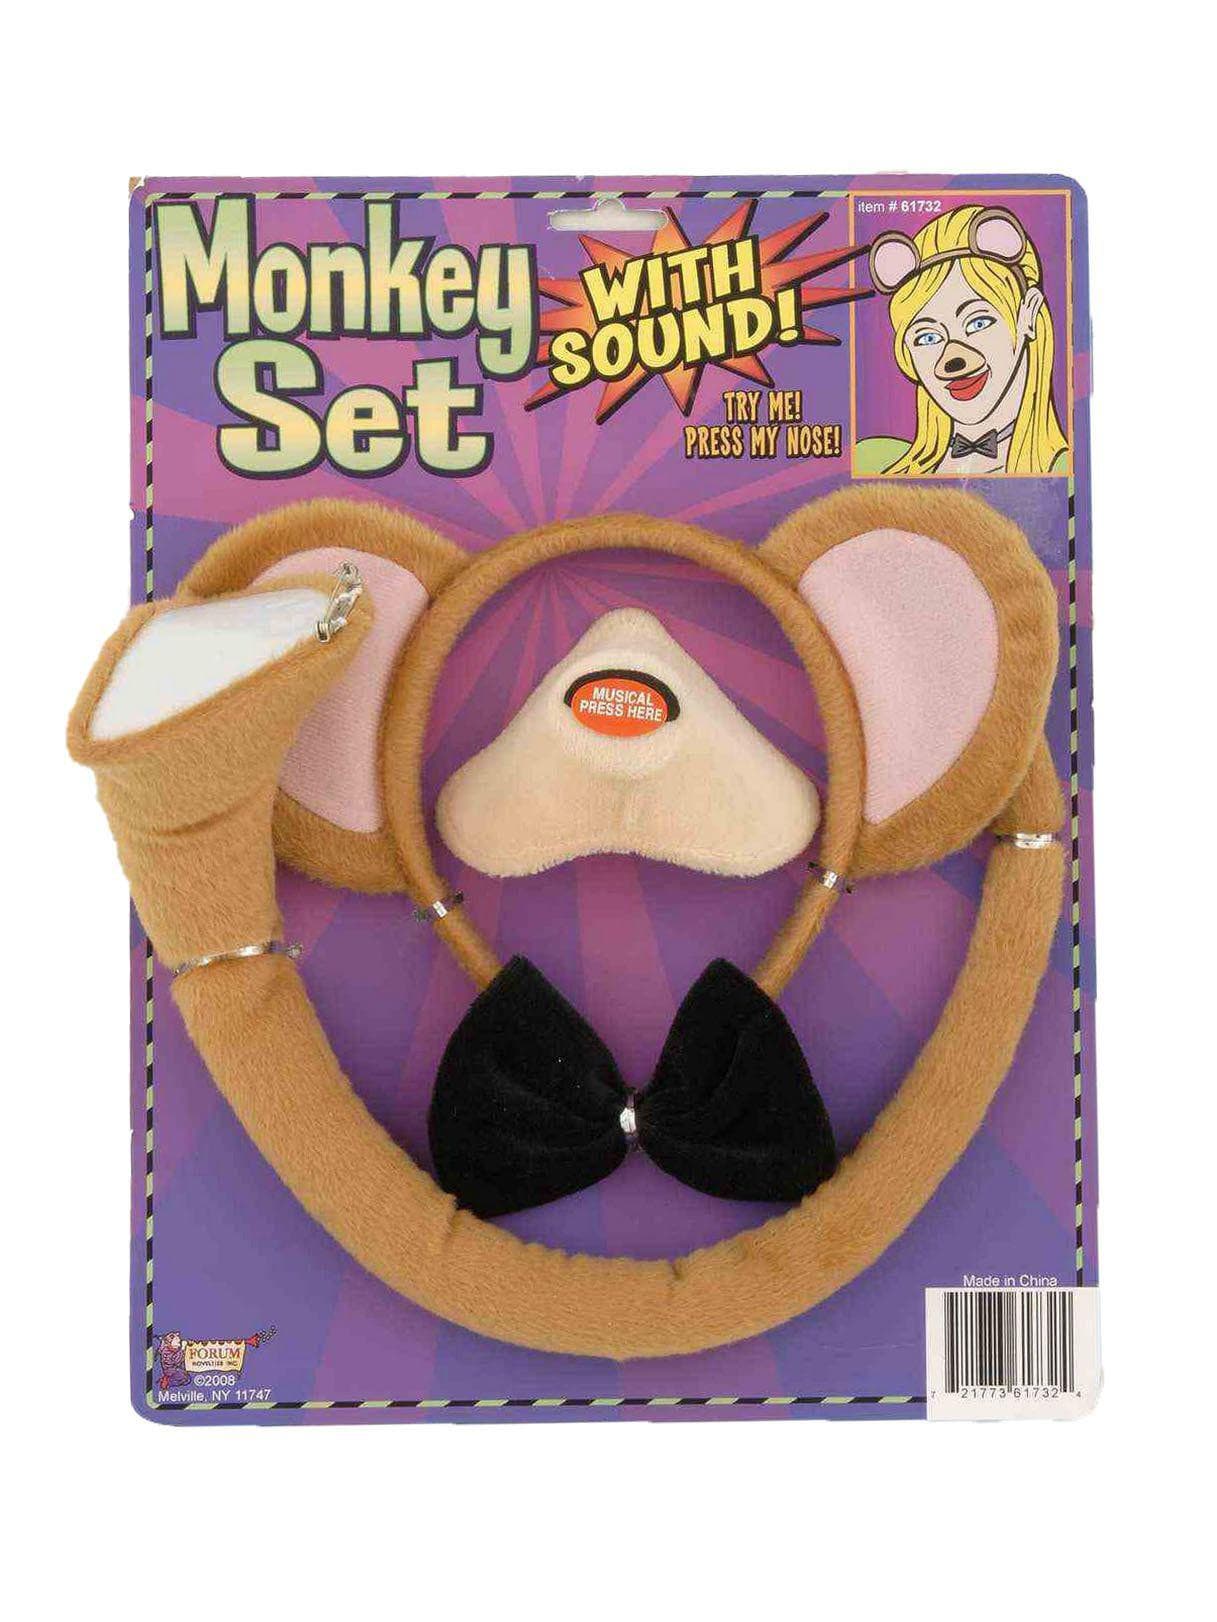 Adult Monkey Accessory Set with Sound - costumes.com